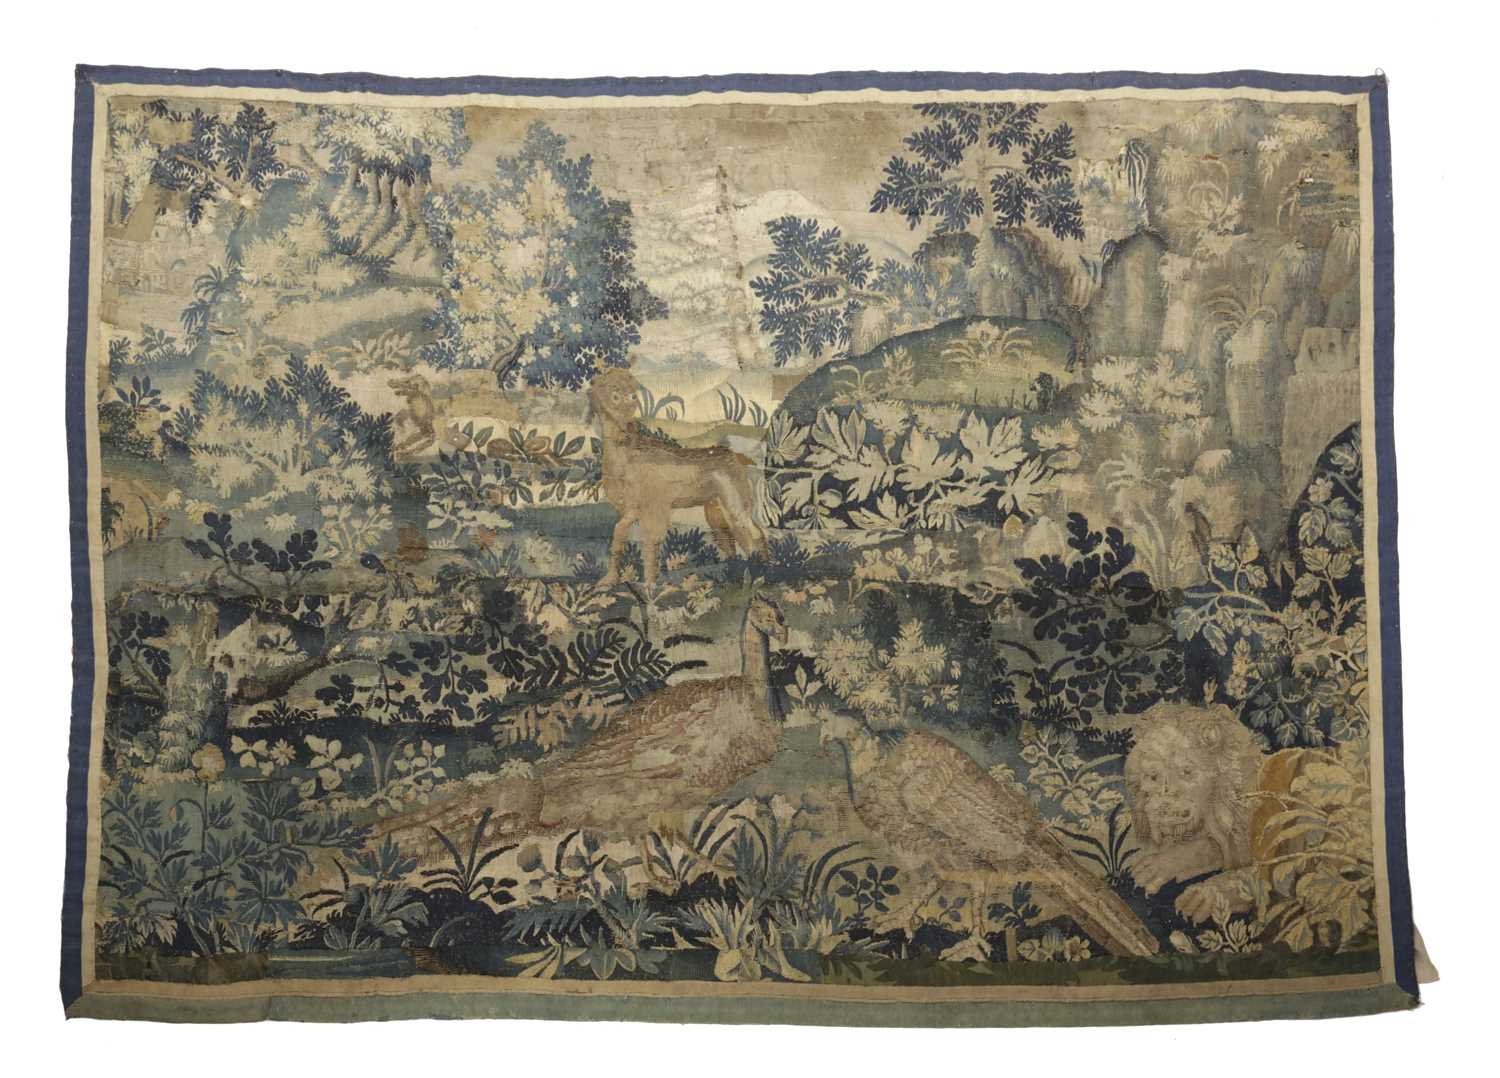 A FLEMISH VERDURE TAPESTRY 17TH CENTURY woven in silk and wool, depicting pheasants and wild